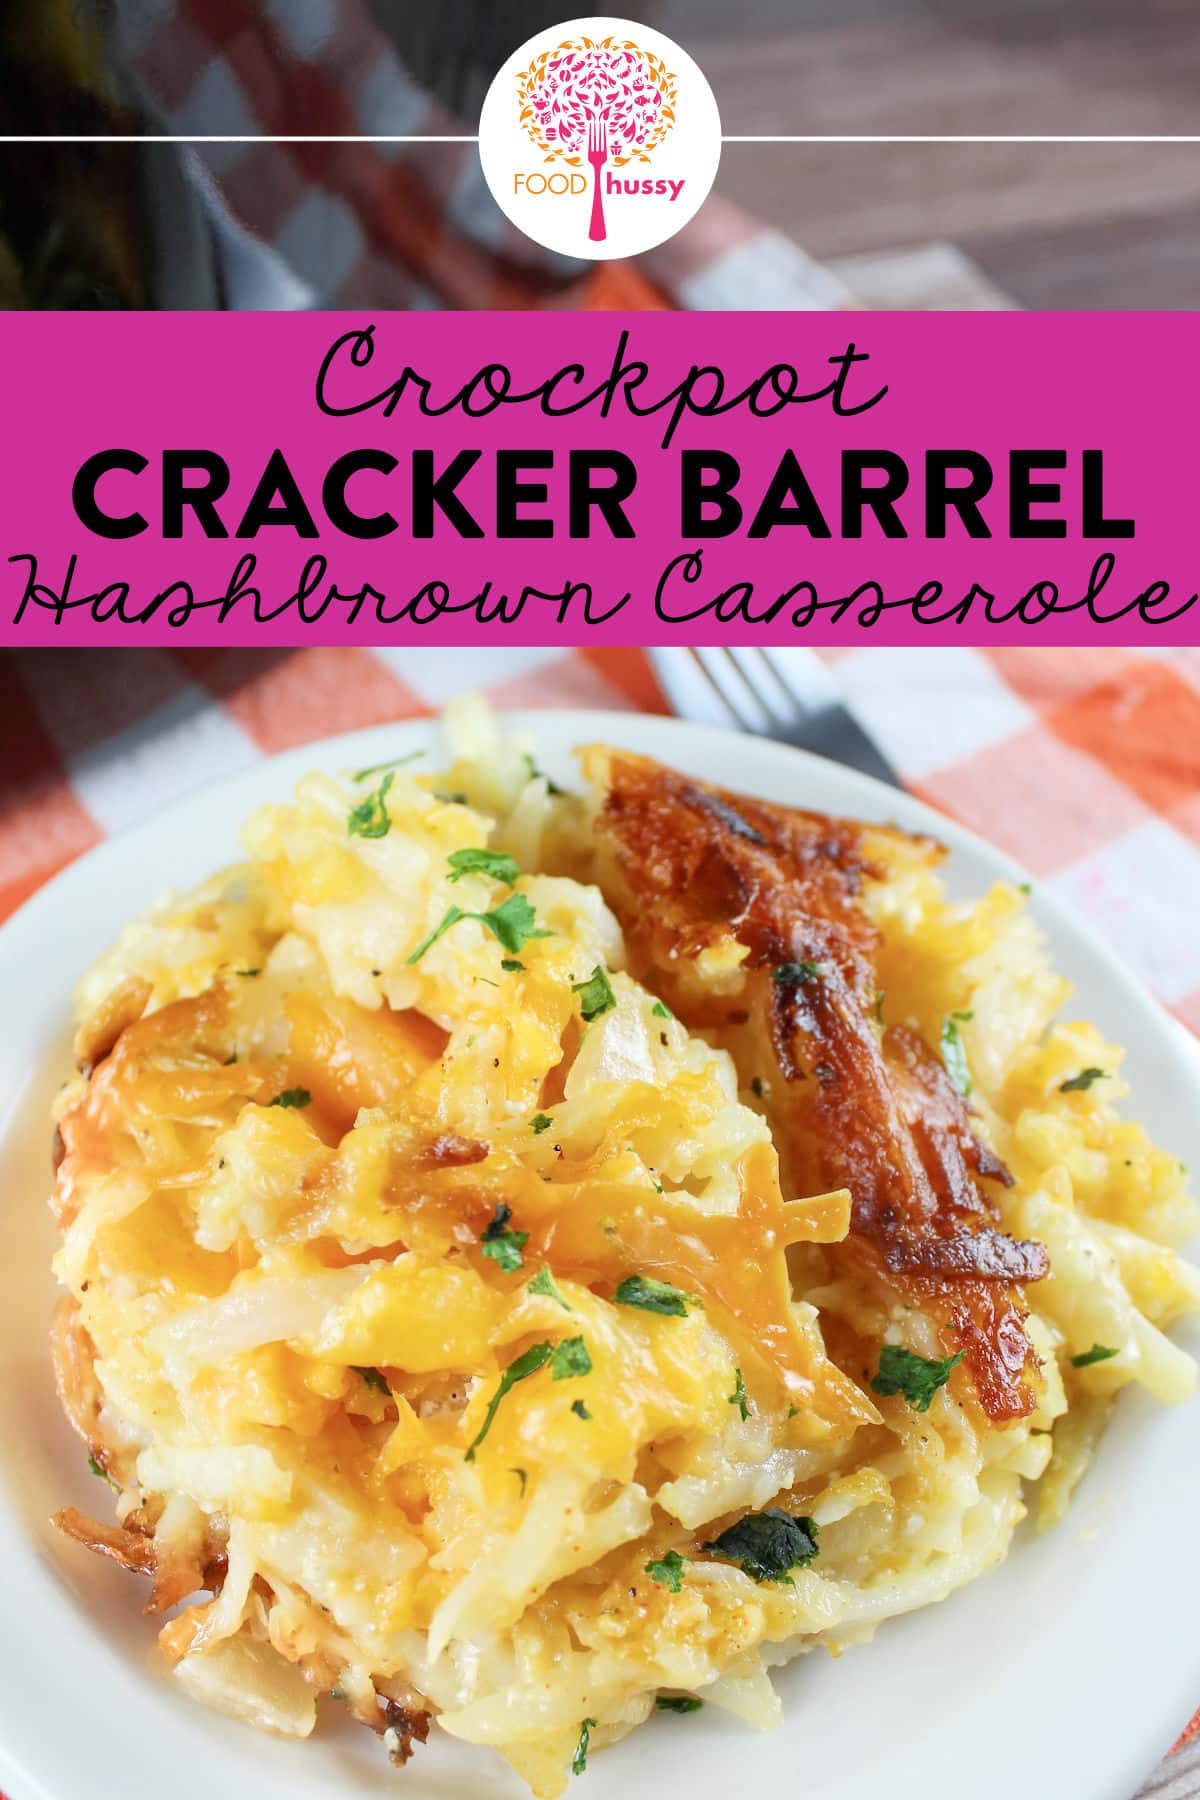 Making Cracker Barrel Hashbrown Casserole in a crock pot is simple and delicious! Layers of cheese, hashbrowns, diced onion and a light cream sauce all melted together for the perfect side dish. via @foodhussy